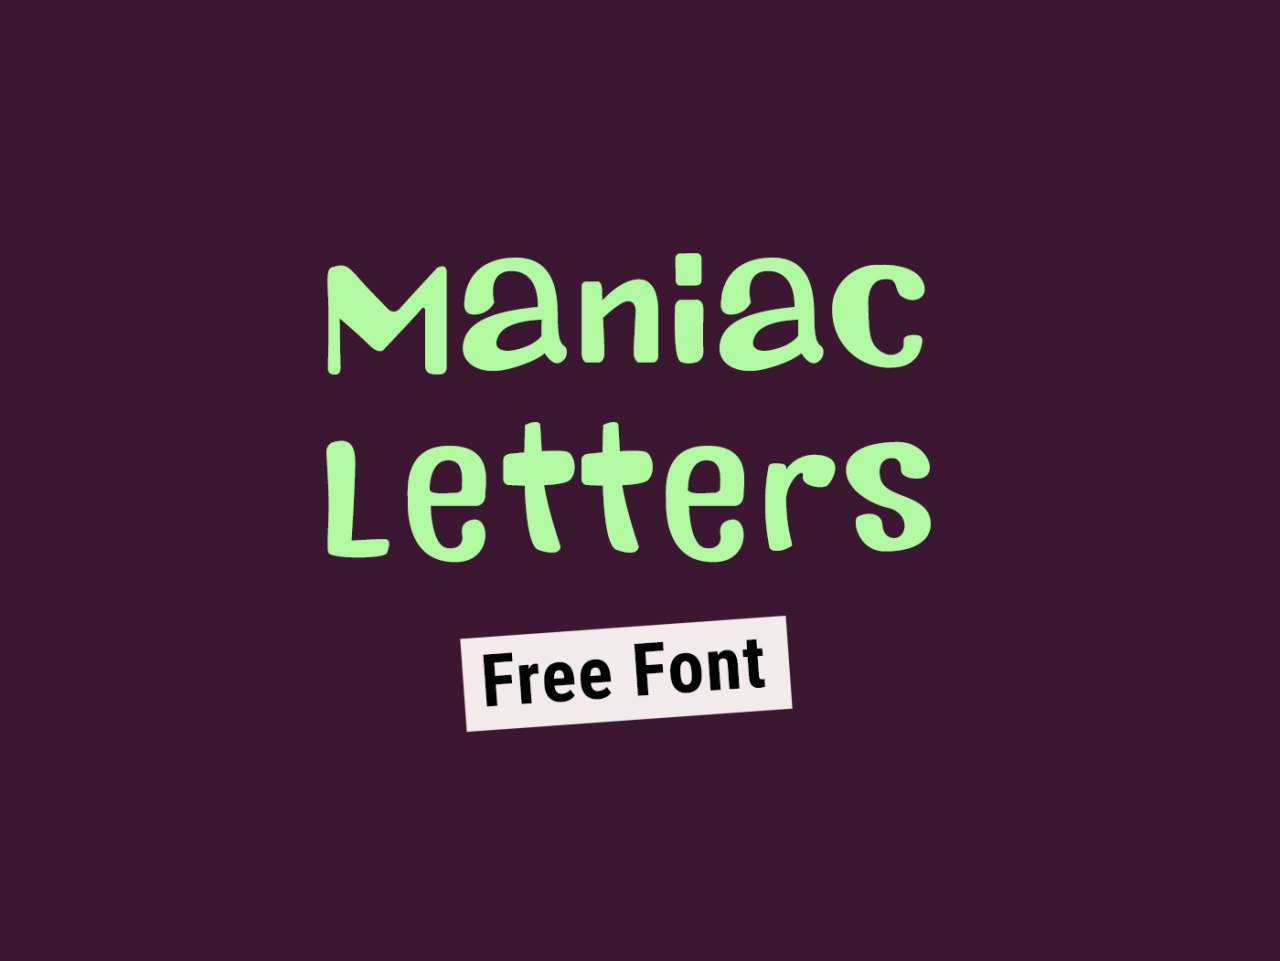 maniac letters